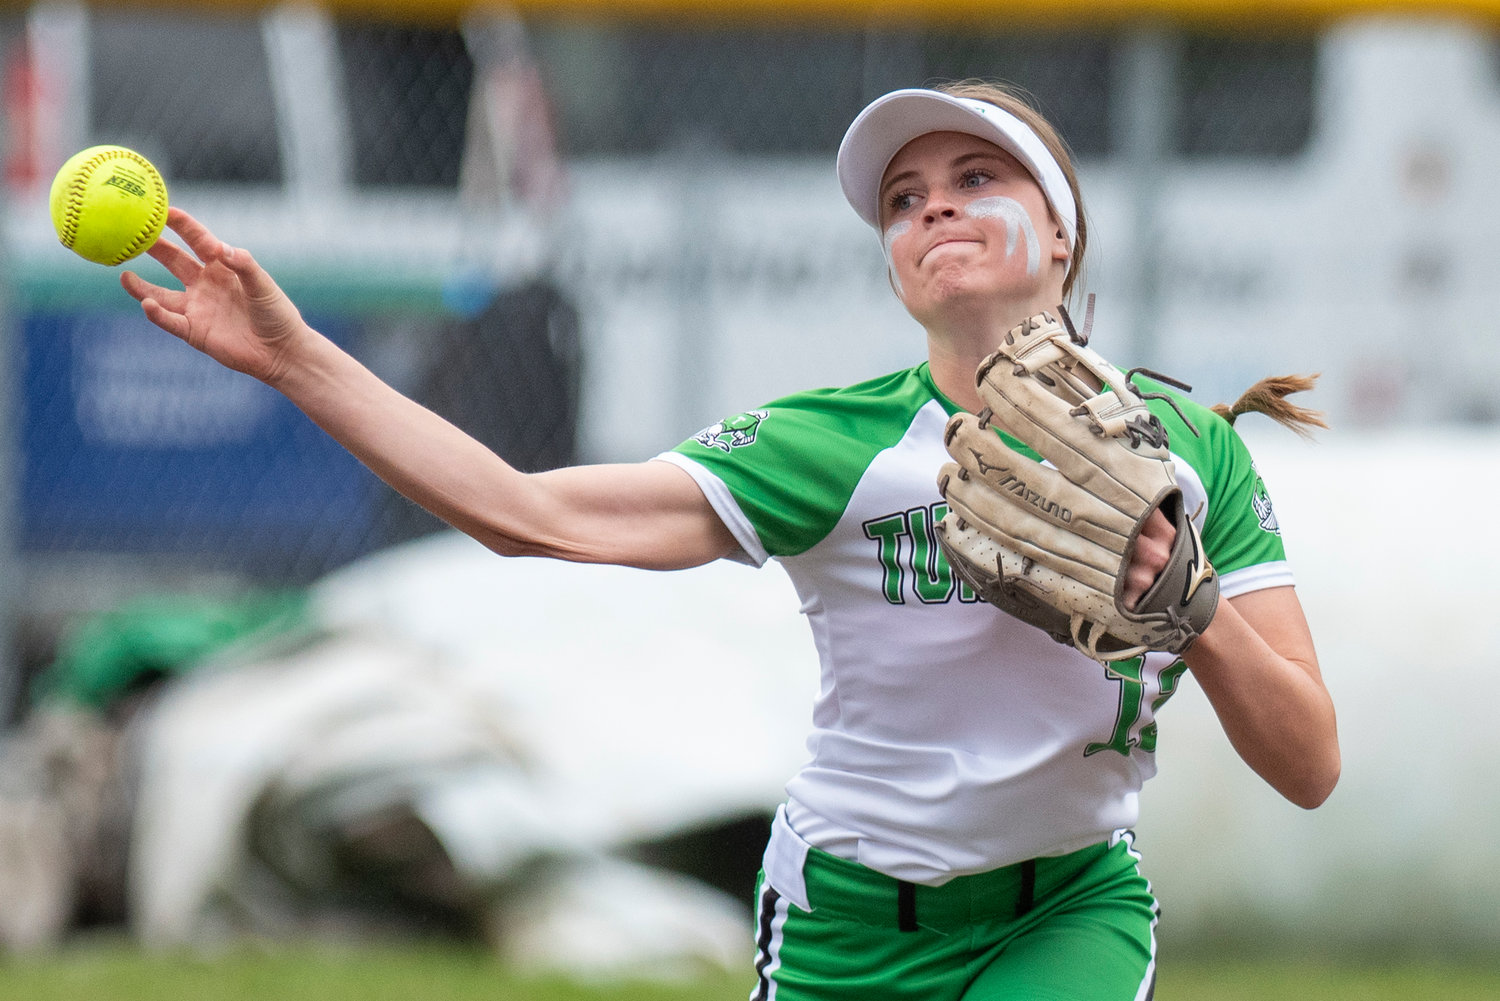 Tumwater shortstop Aly Waltermeyer makes a throw to first base during a home game against W.F. West on May 2.